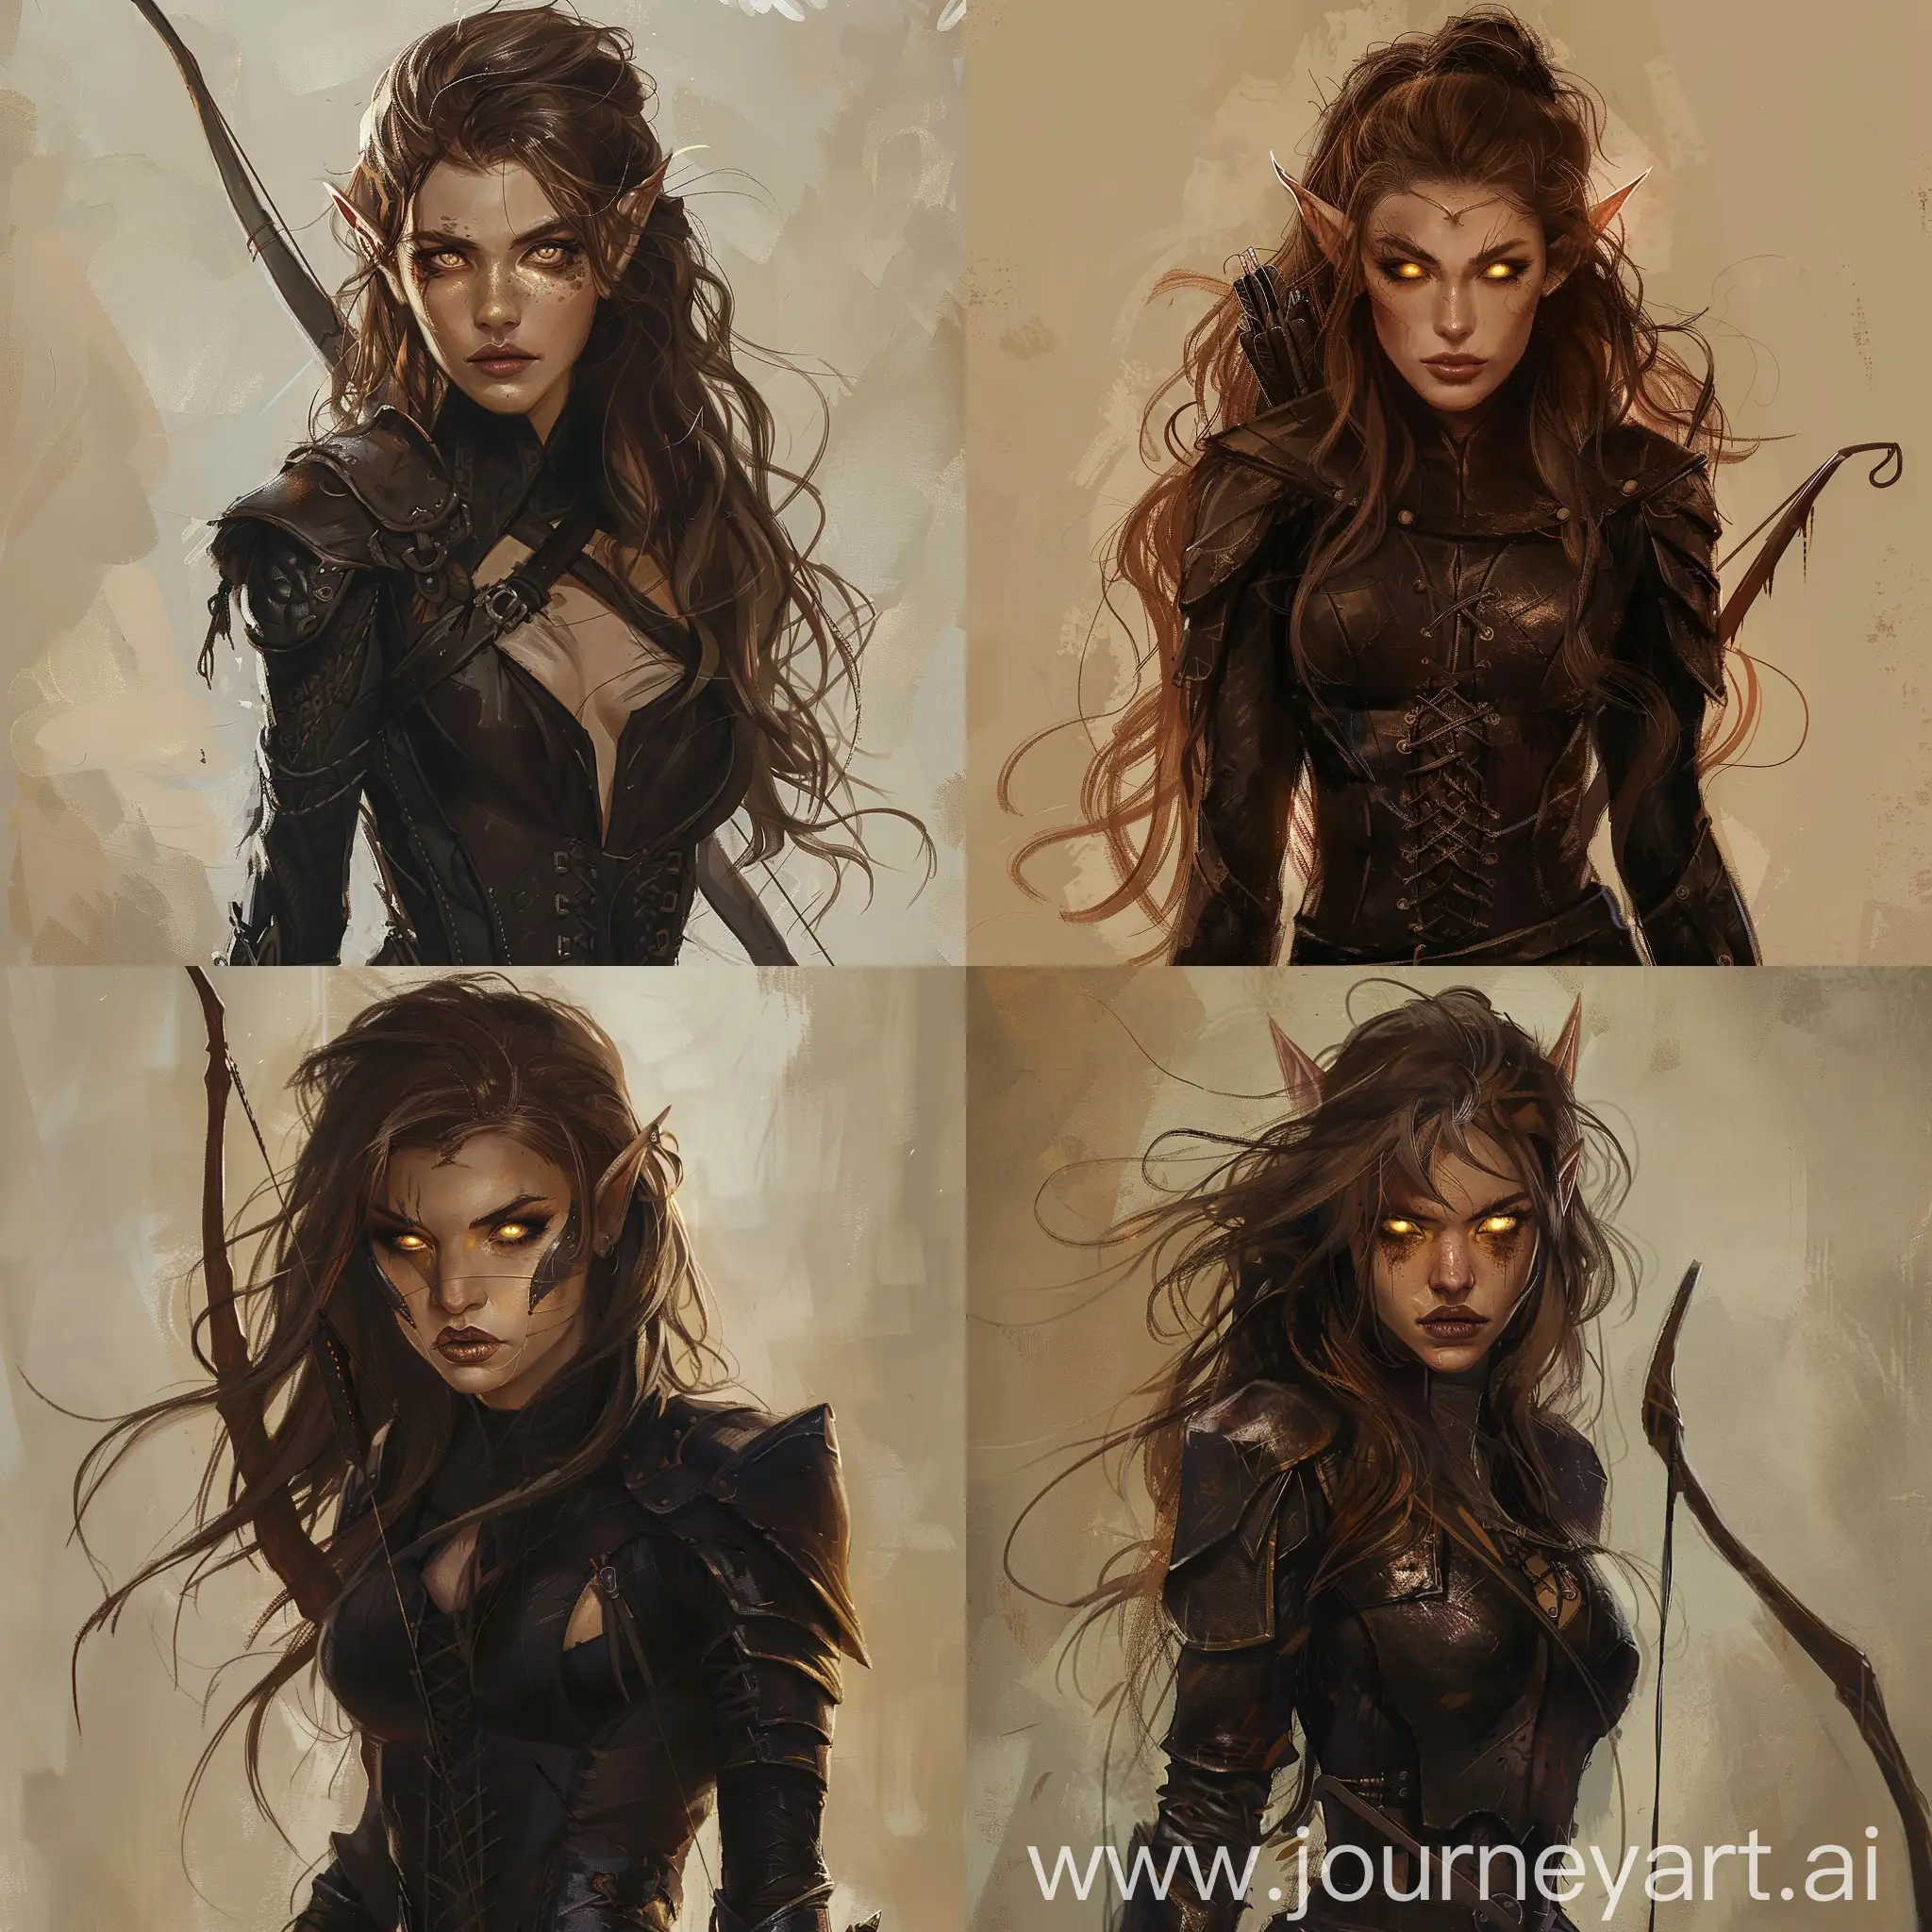 Character concept art. Full body. Wood elf woman, Brown long hair, messy hairstyle, light gold eyes color, glow eyes effect, dark lips, sadistic gaze, arrogant face, black light leather armor, Longbow. Image is sinister and in light brown tones